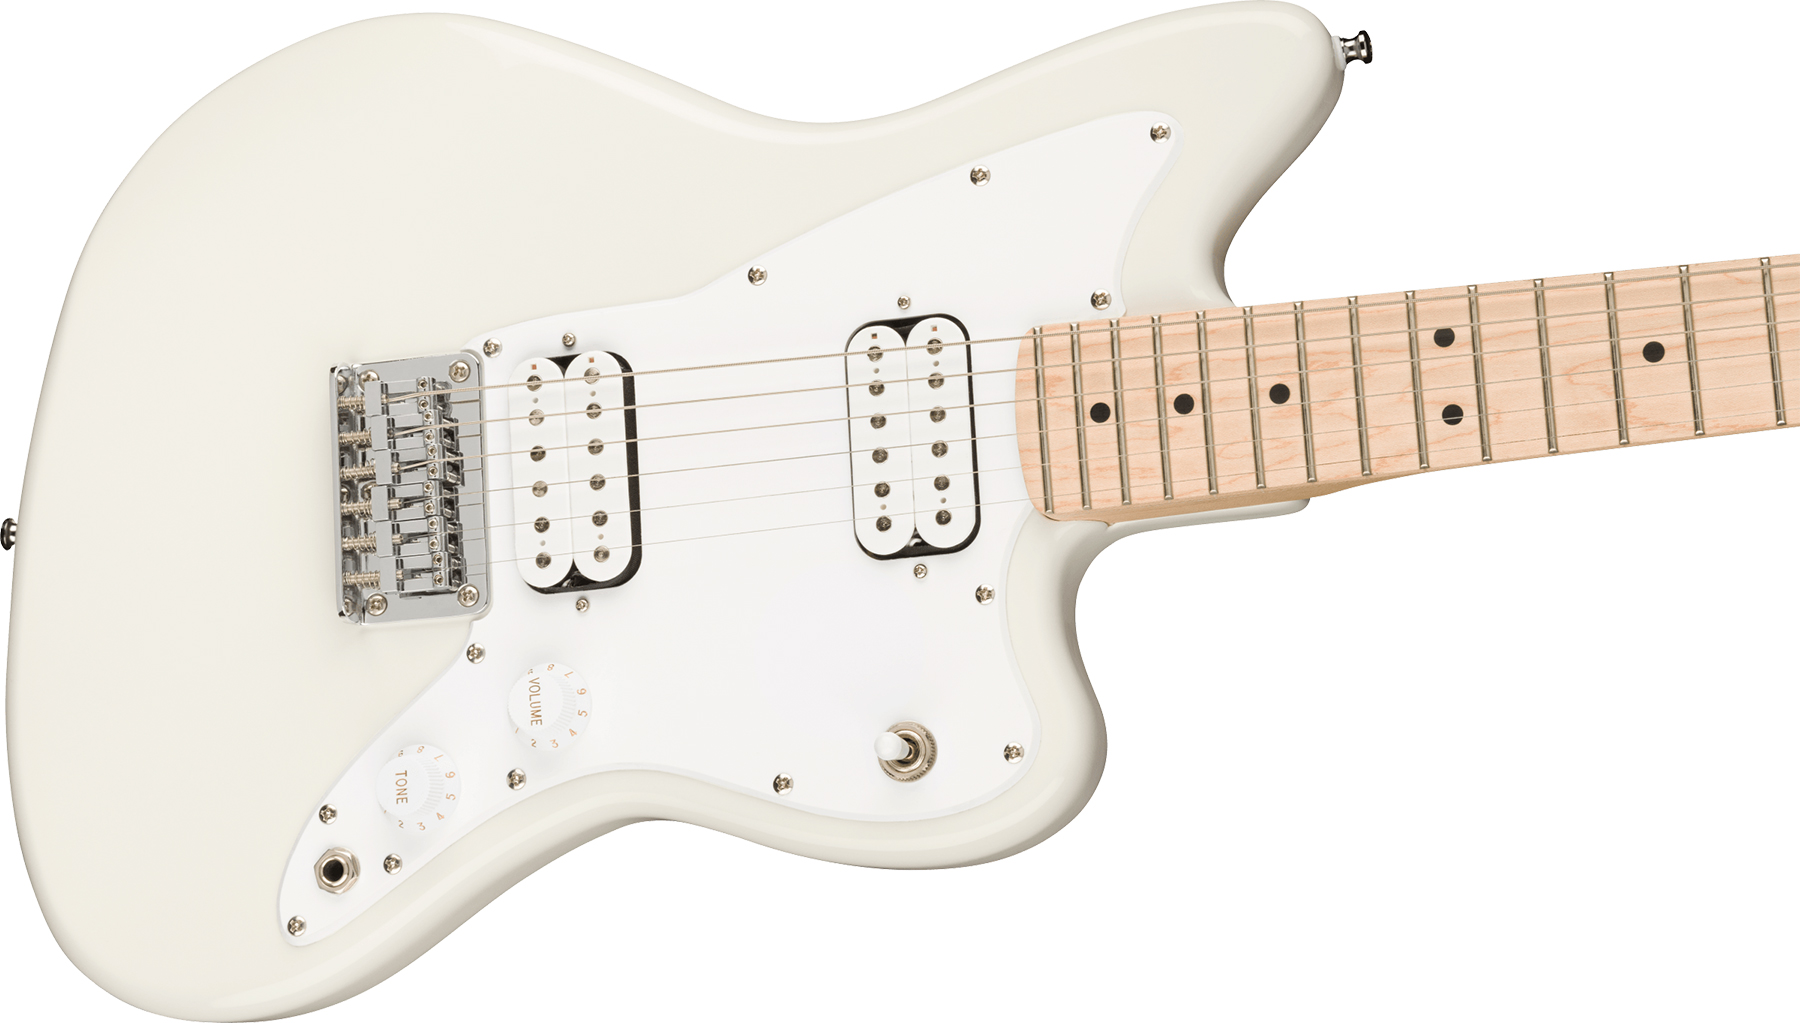 Squier Mini Jazzmaster Bullet Hh Ht Mn - Olympic White - Electric guitar for kids - Variation 2